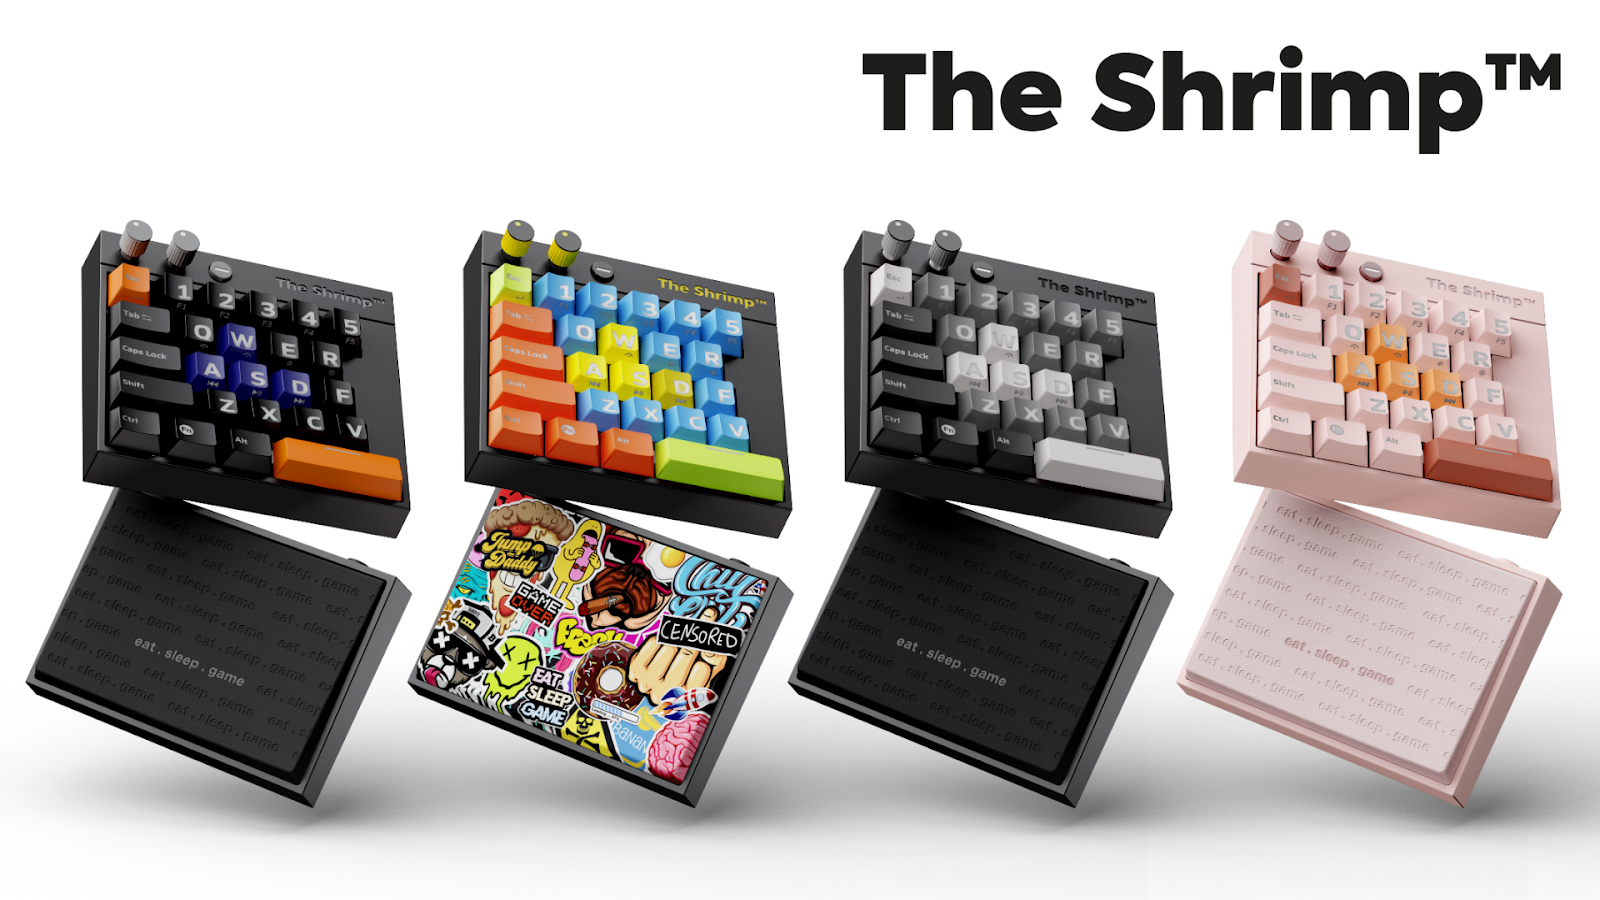 The Shrimp is an ultra-compact mechanical gaming keyboard